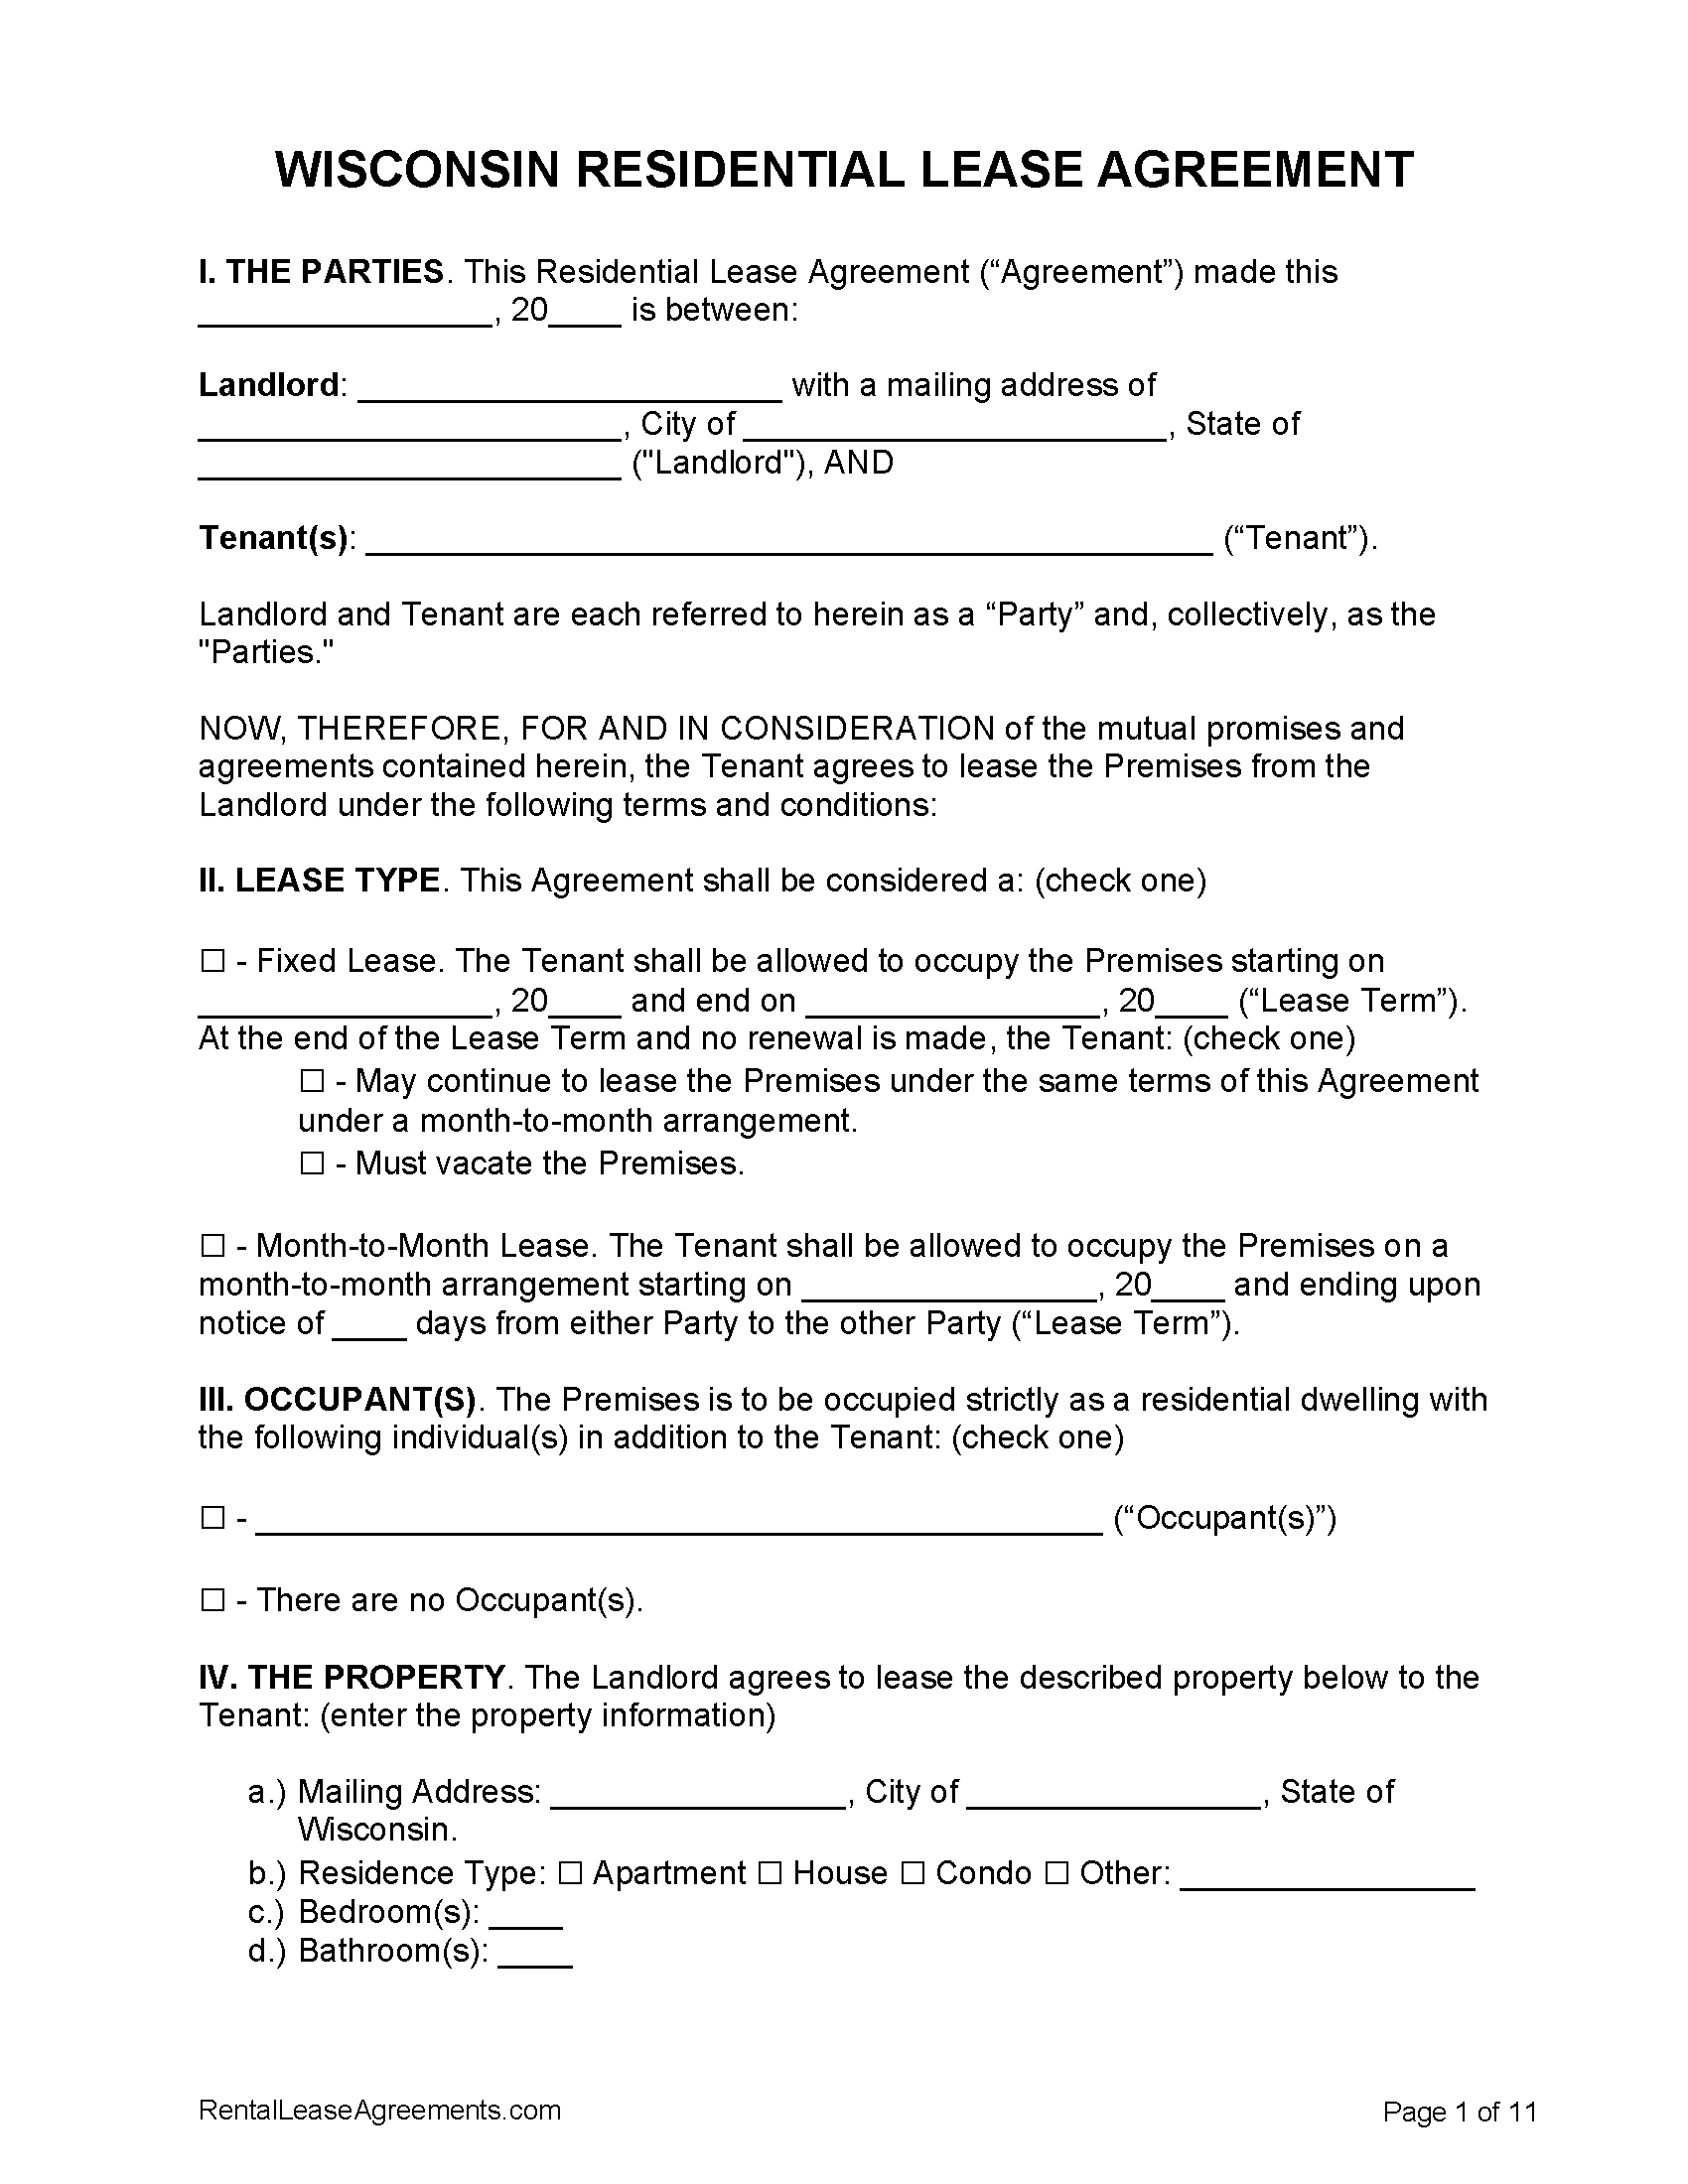 wisconsin residential lease agreement pdf ms word